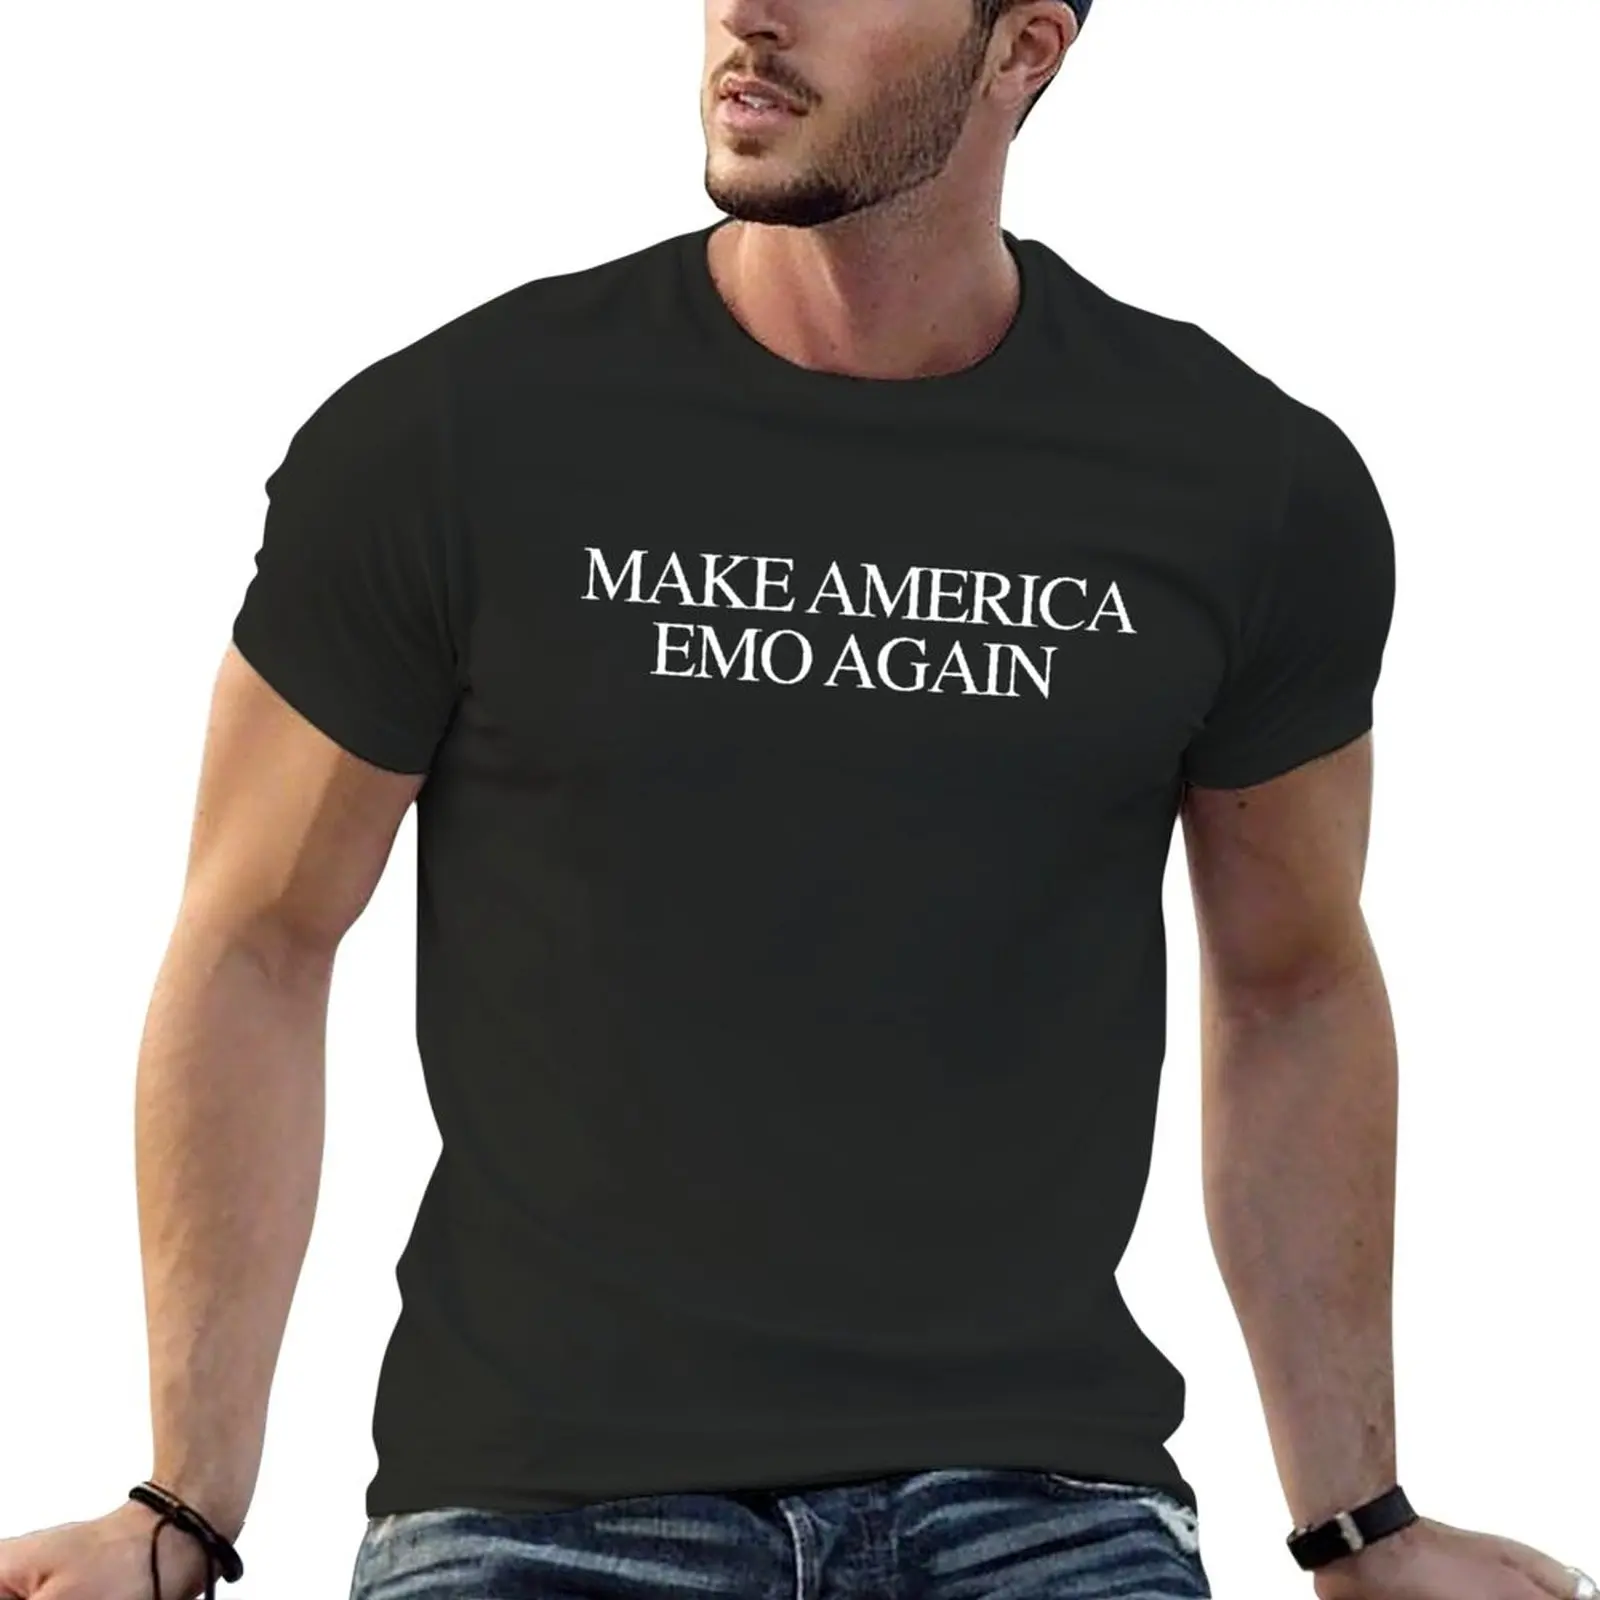 

Make America Emo Again T-Shirt hippie clothes tops plus size tops mens vintage t shirts